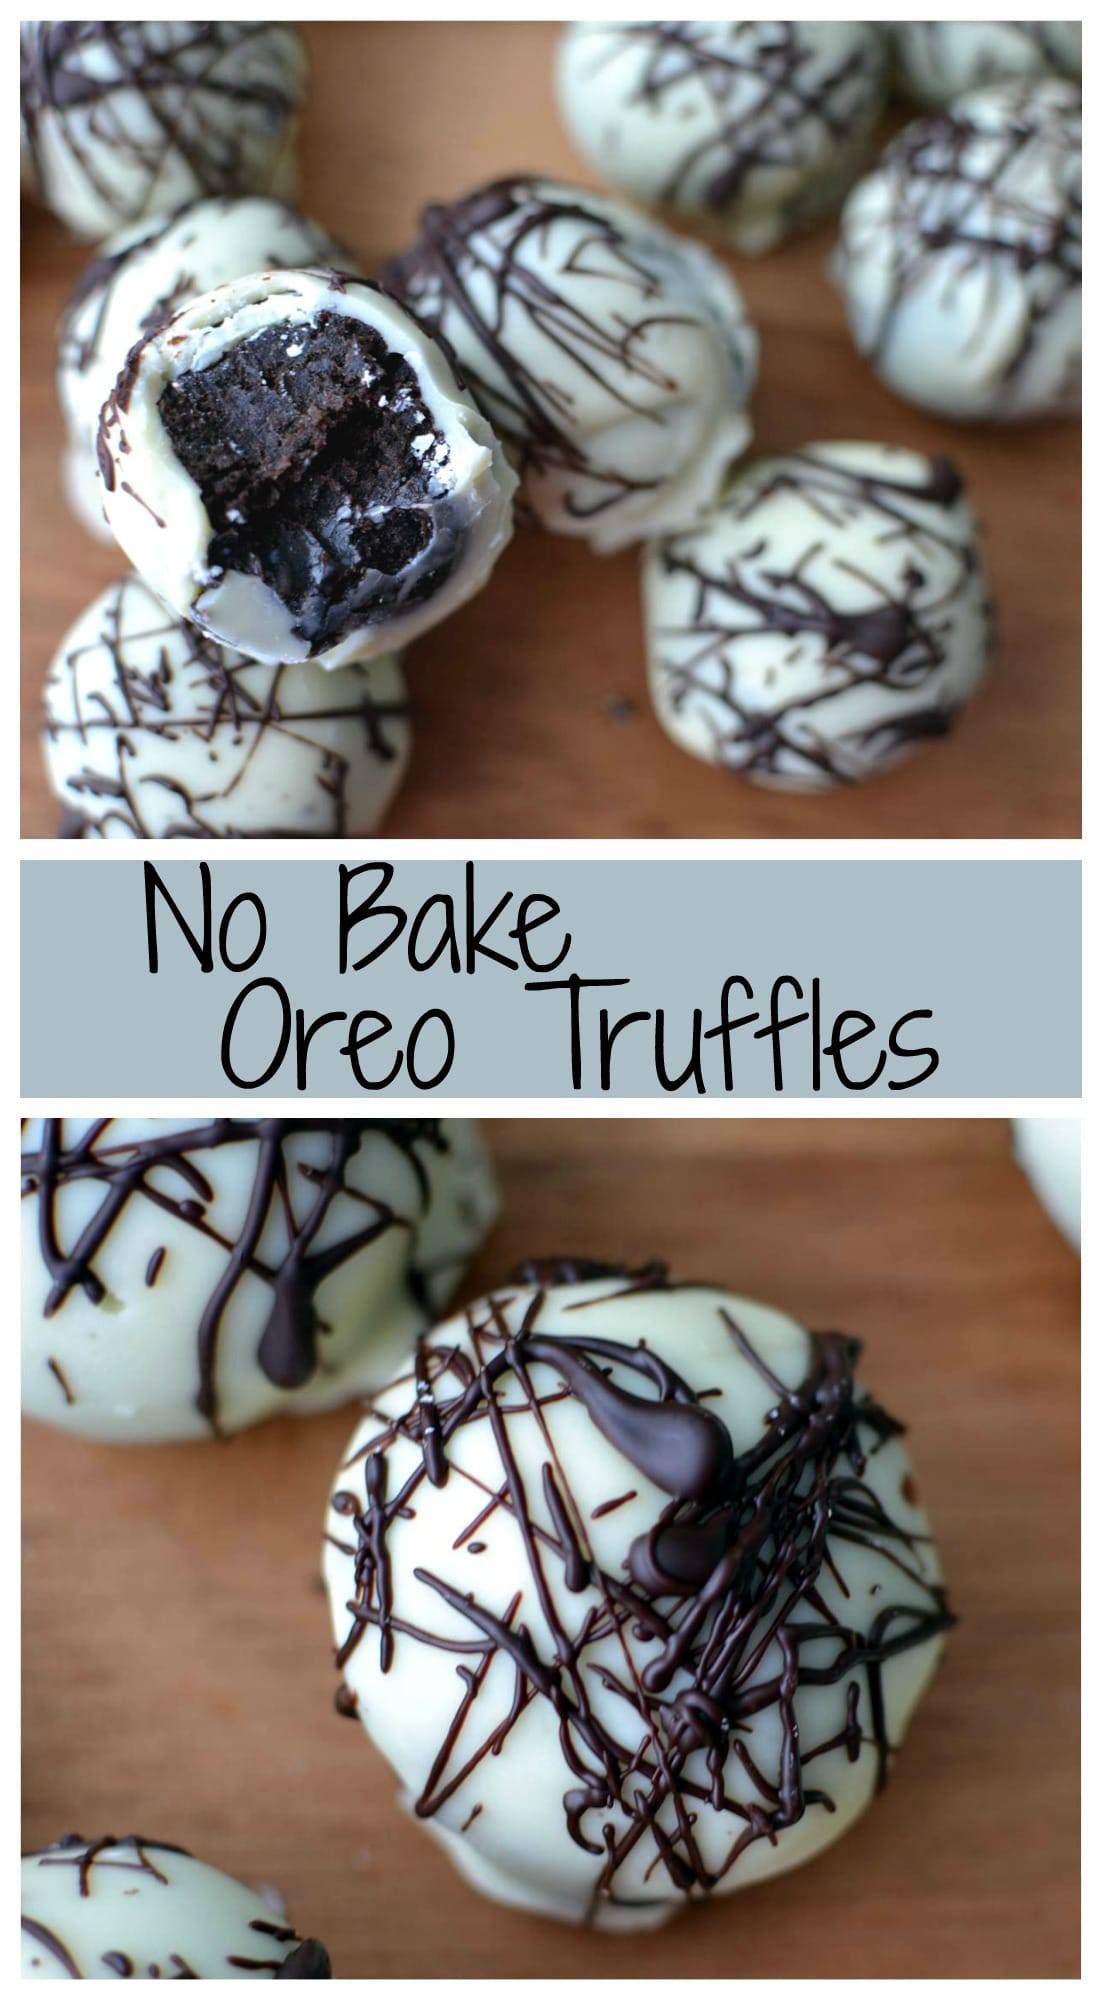 No Bake Oreo Truffles & Cookbook Giveaway! - The Cozy Cook